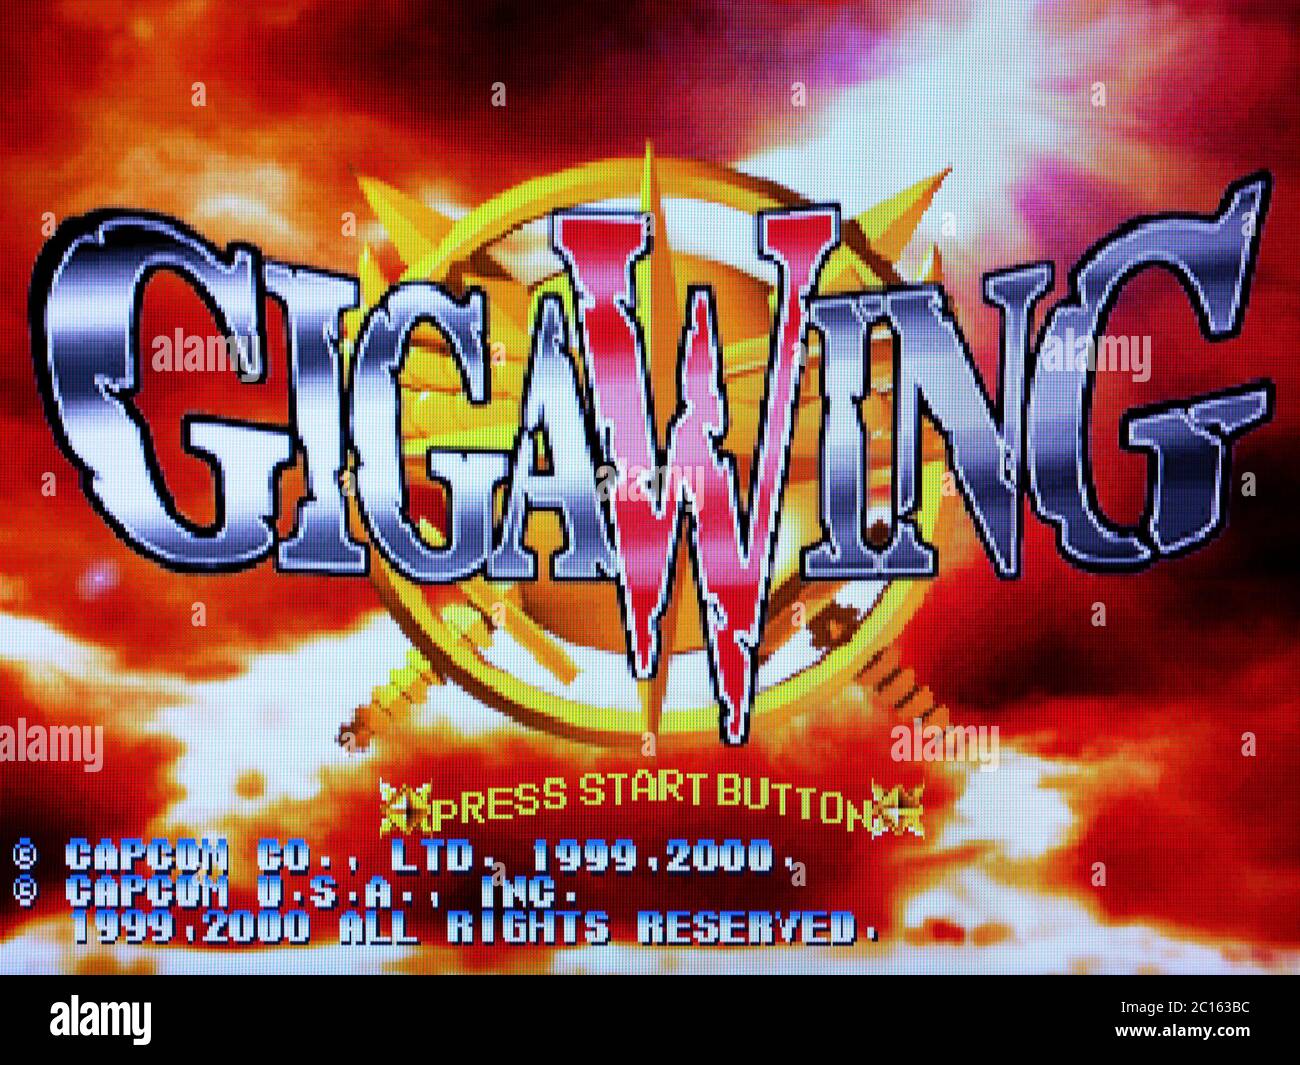 Gigawing - Sega Dreamcast Videogame - Editorial use only Stock Photo